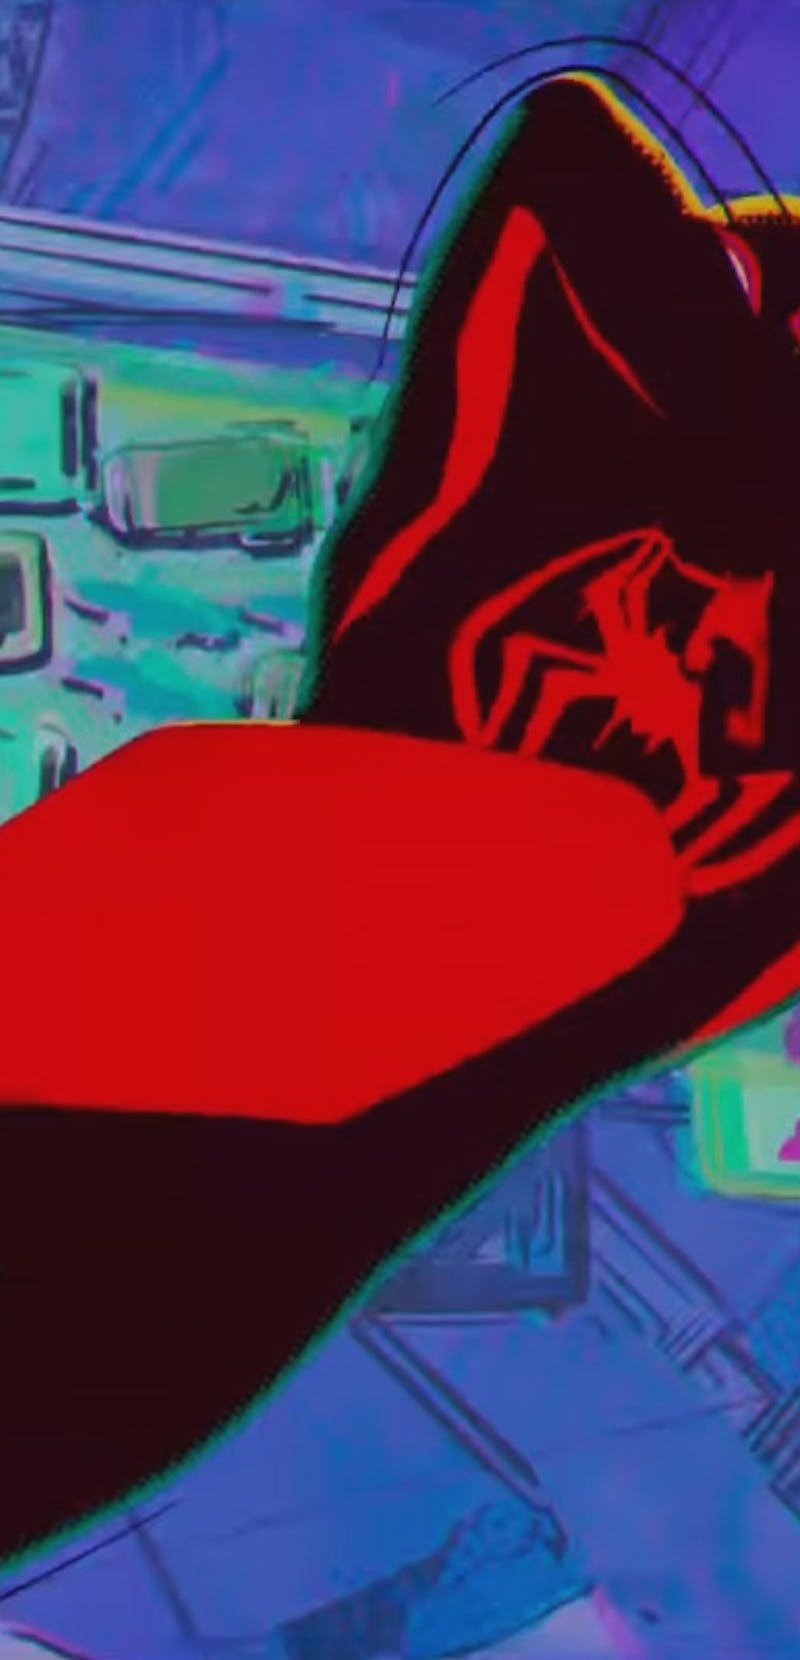 A screenshot of Miles Morales in costume in Spider-Man Across the Spider-Verse